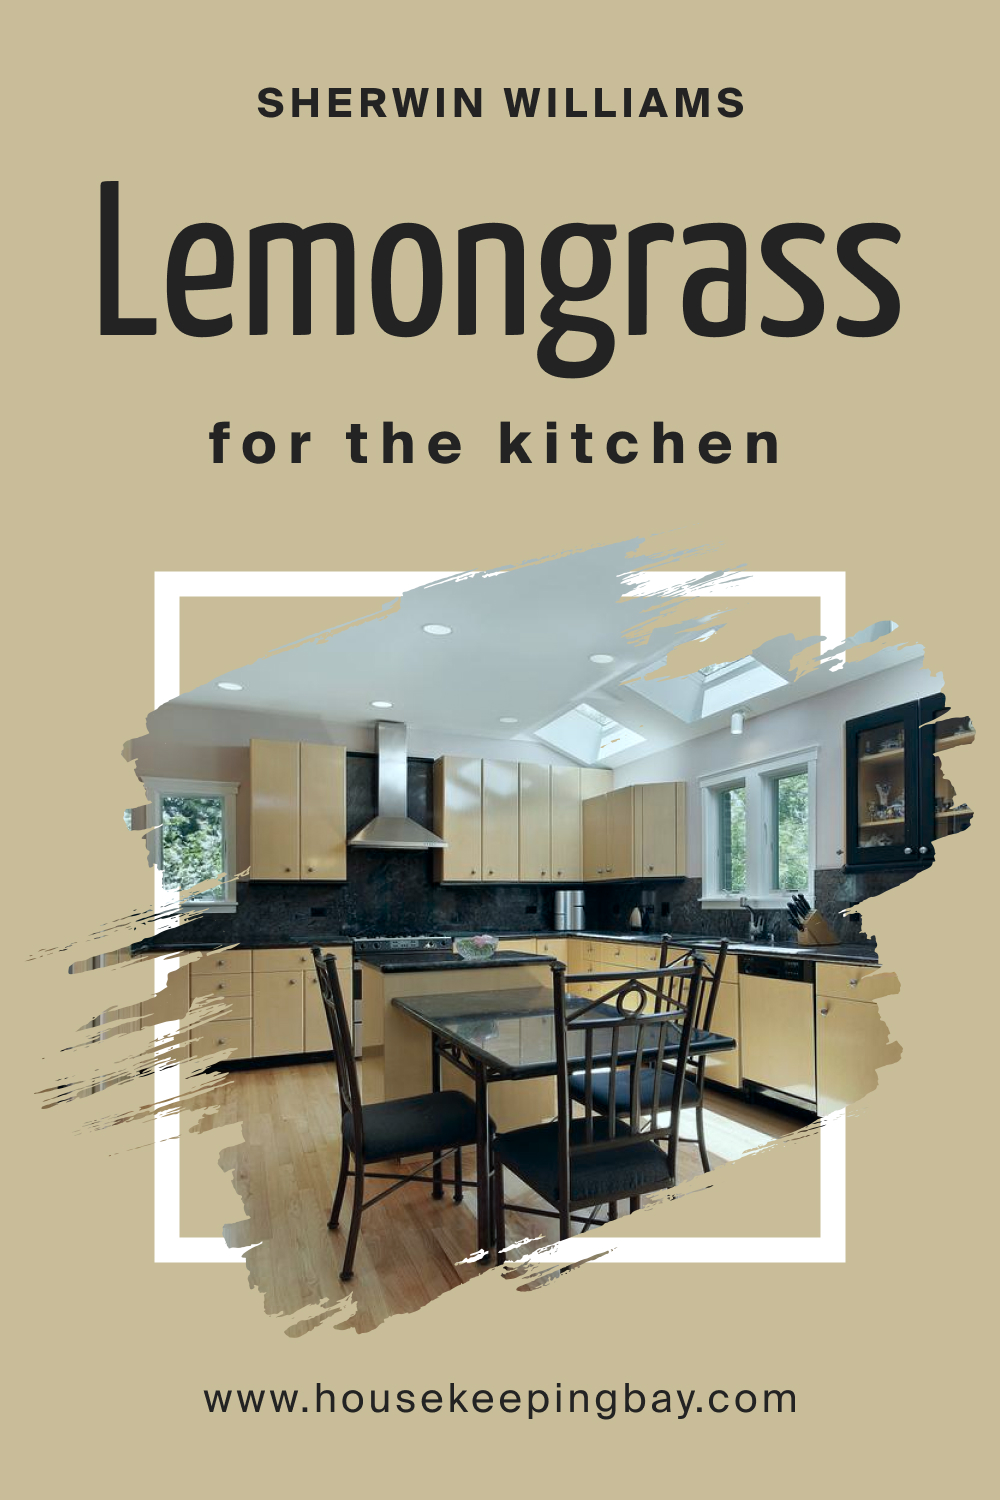 Sherwin Williams. SW 7732 Lemongrass For the Kitchens